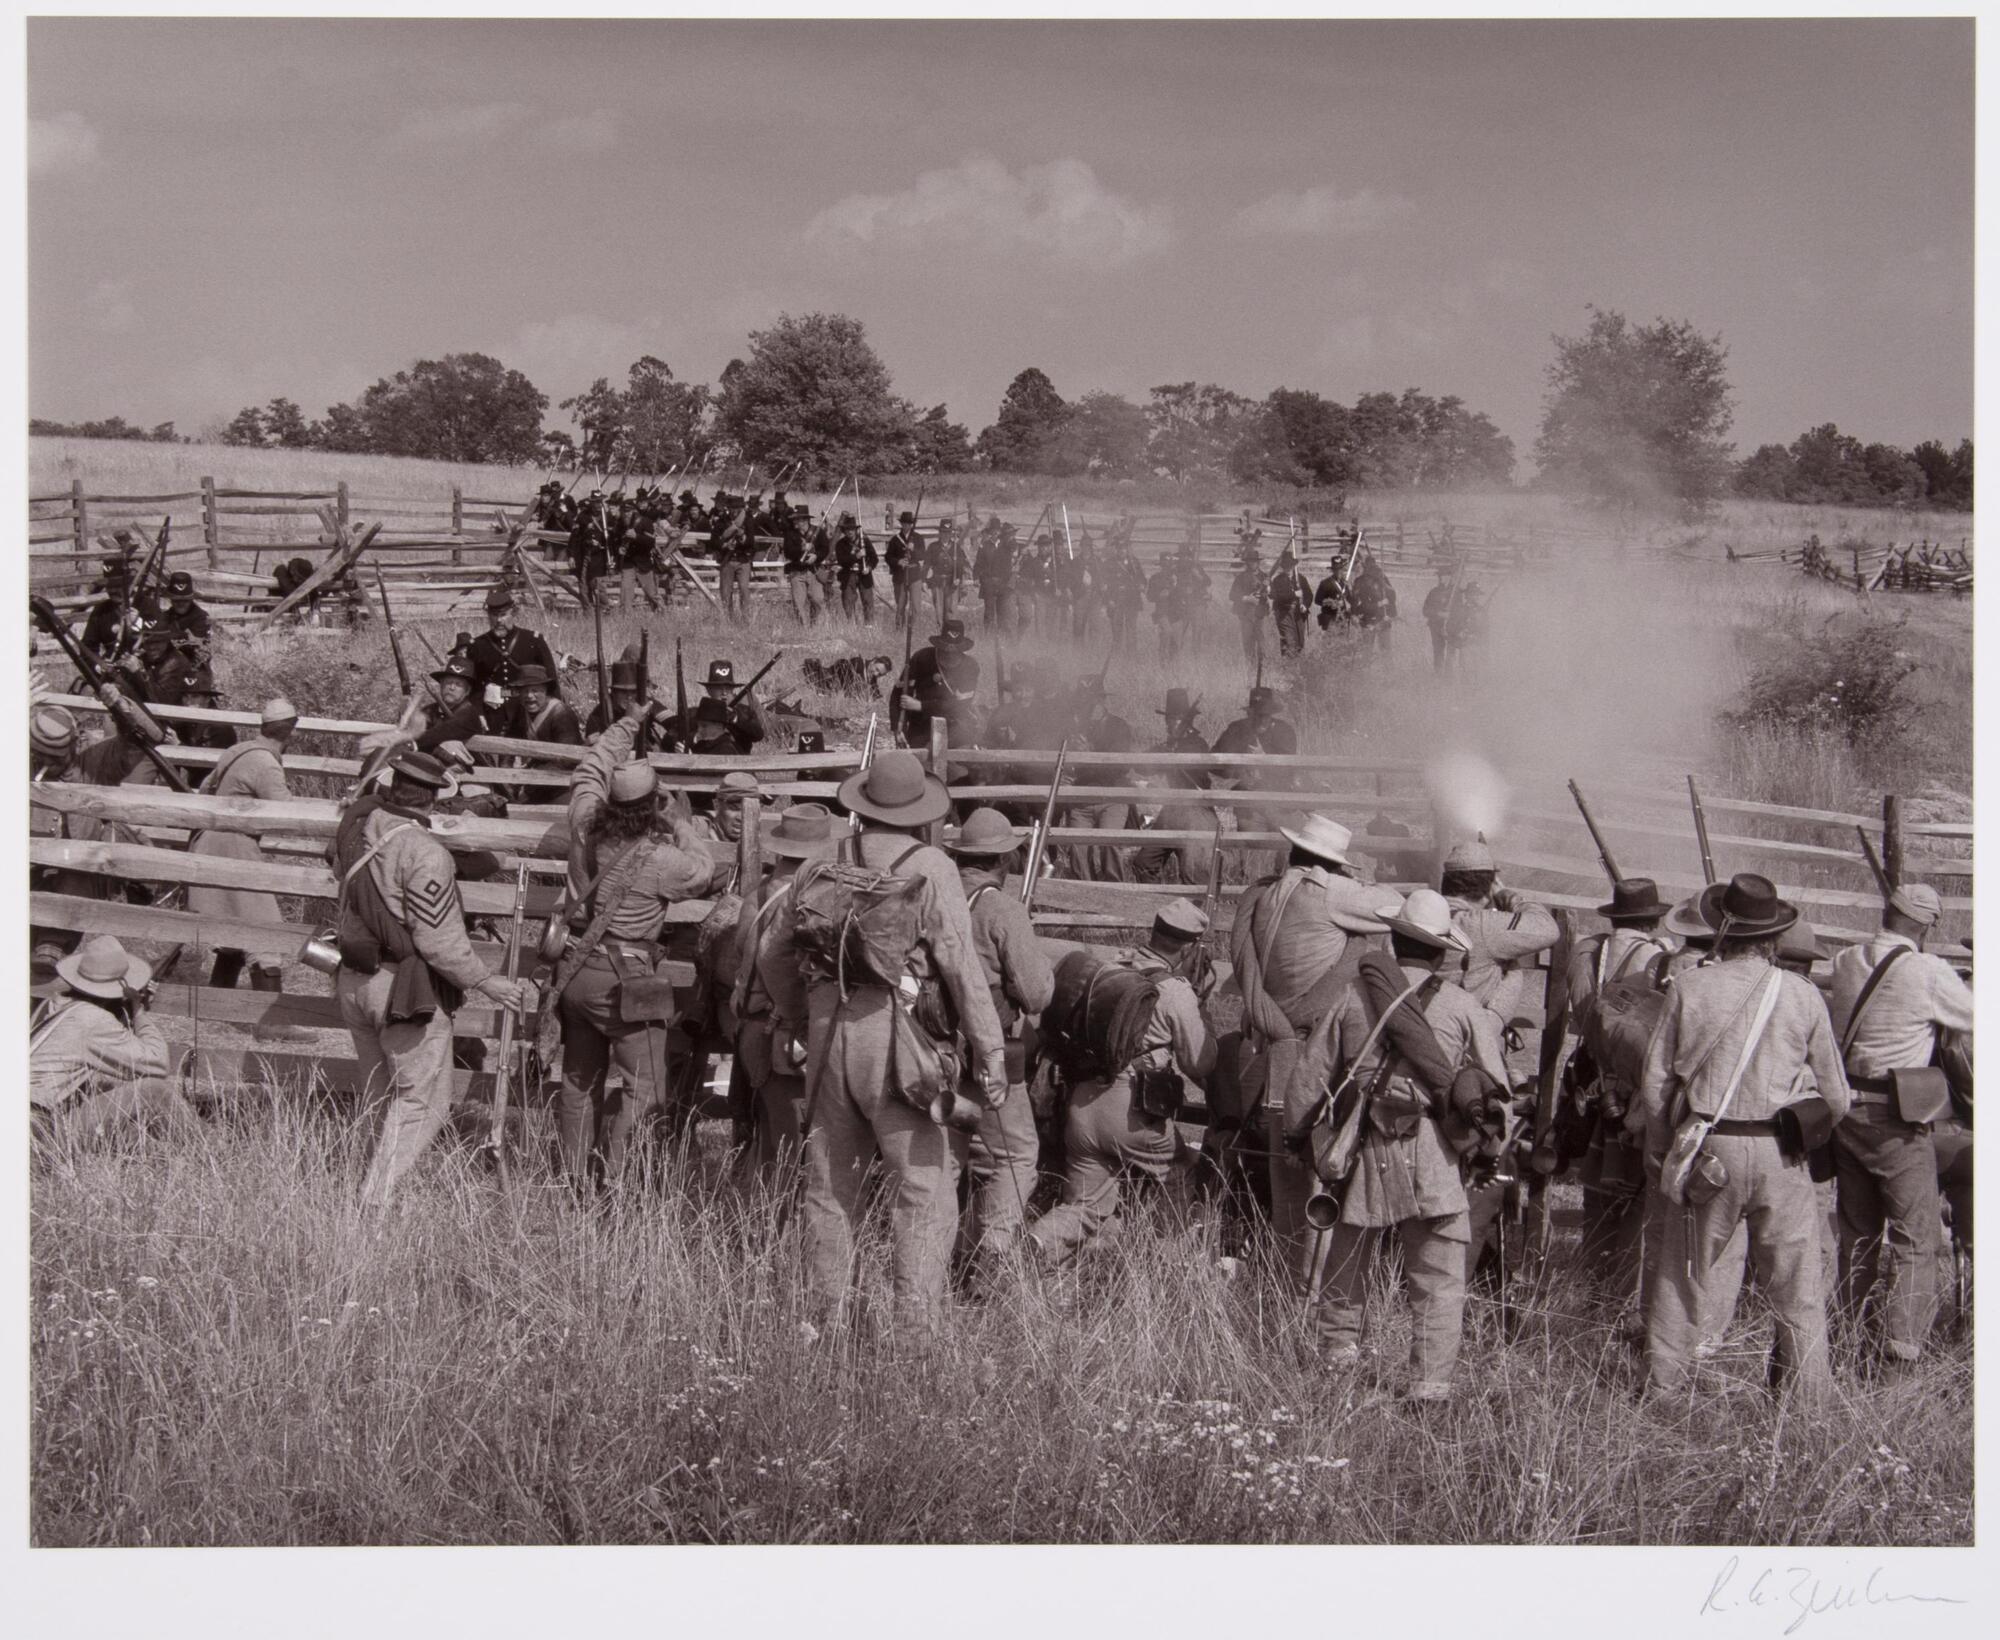 Army Reinactment. Two sides of the battle are fighting in a field with a fence between them.